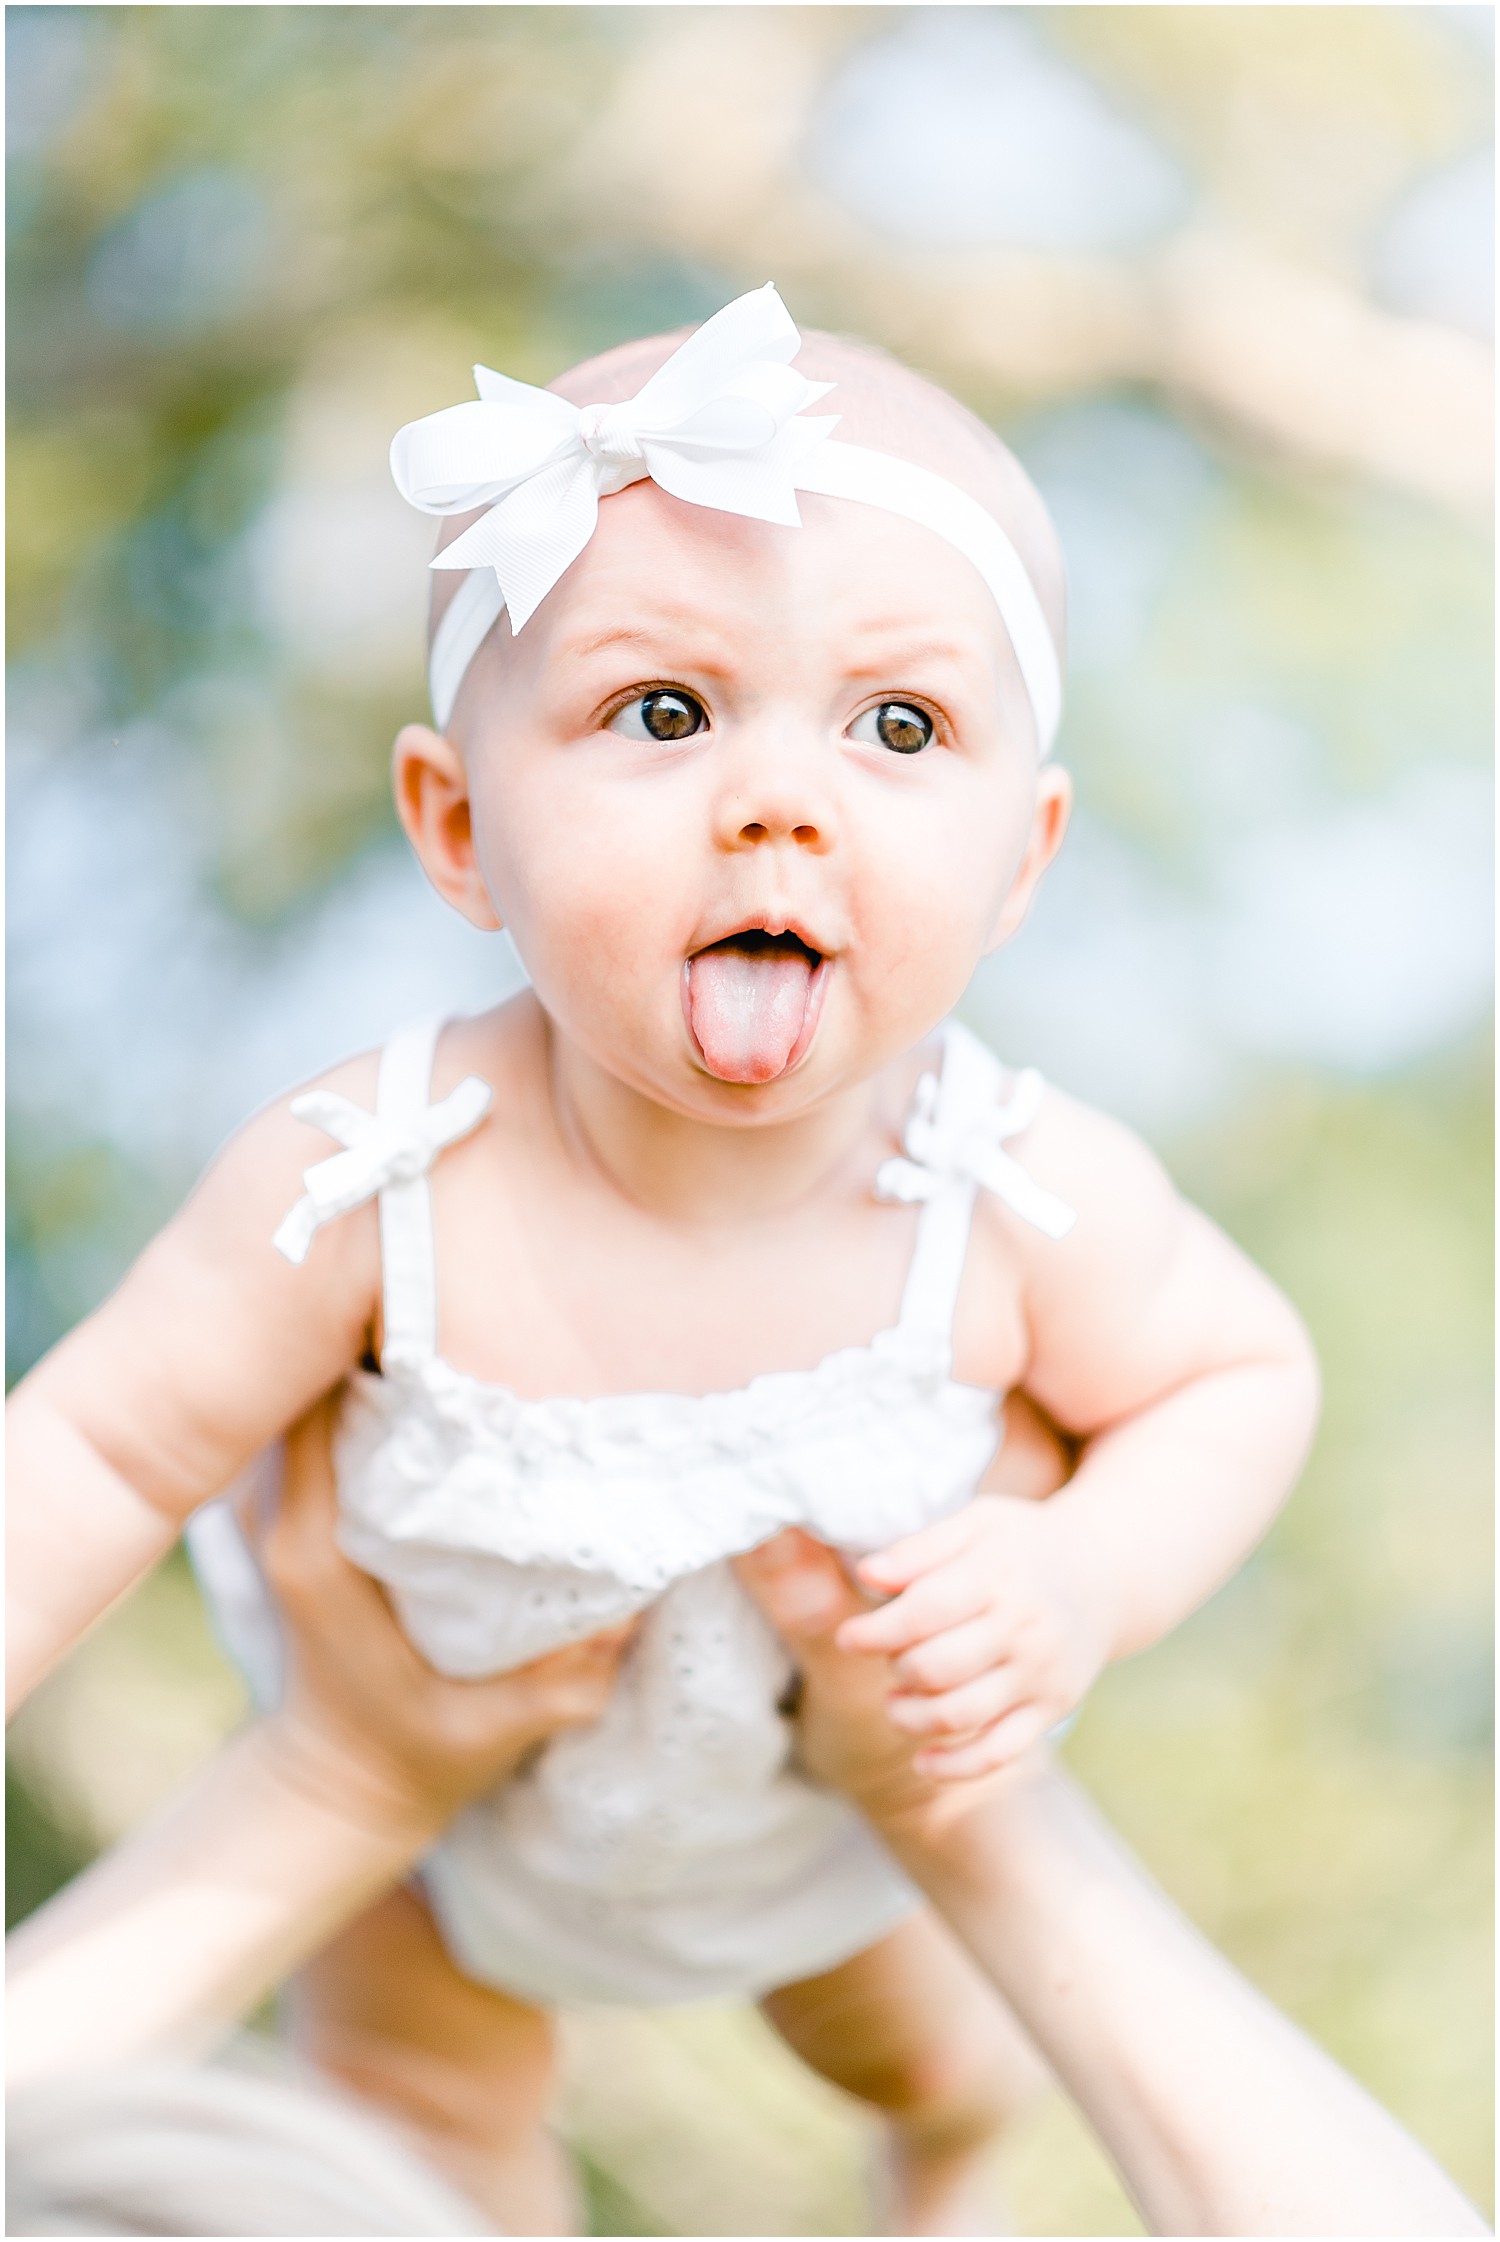 6 month old baby girl being held by mom sticking tongue out family portrait session